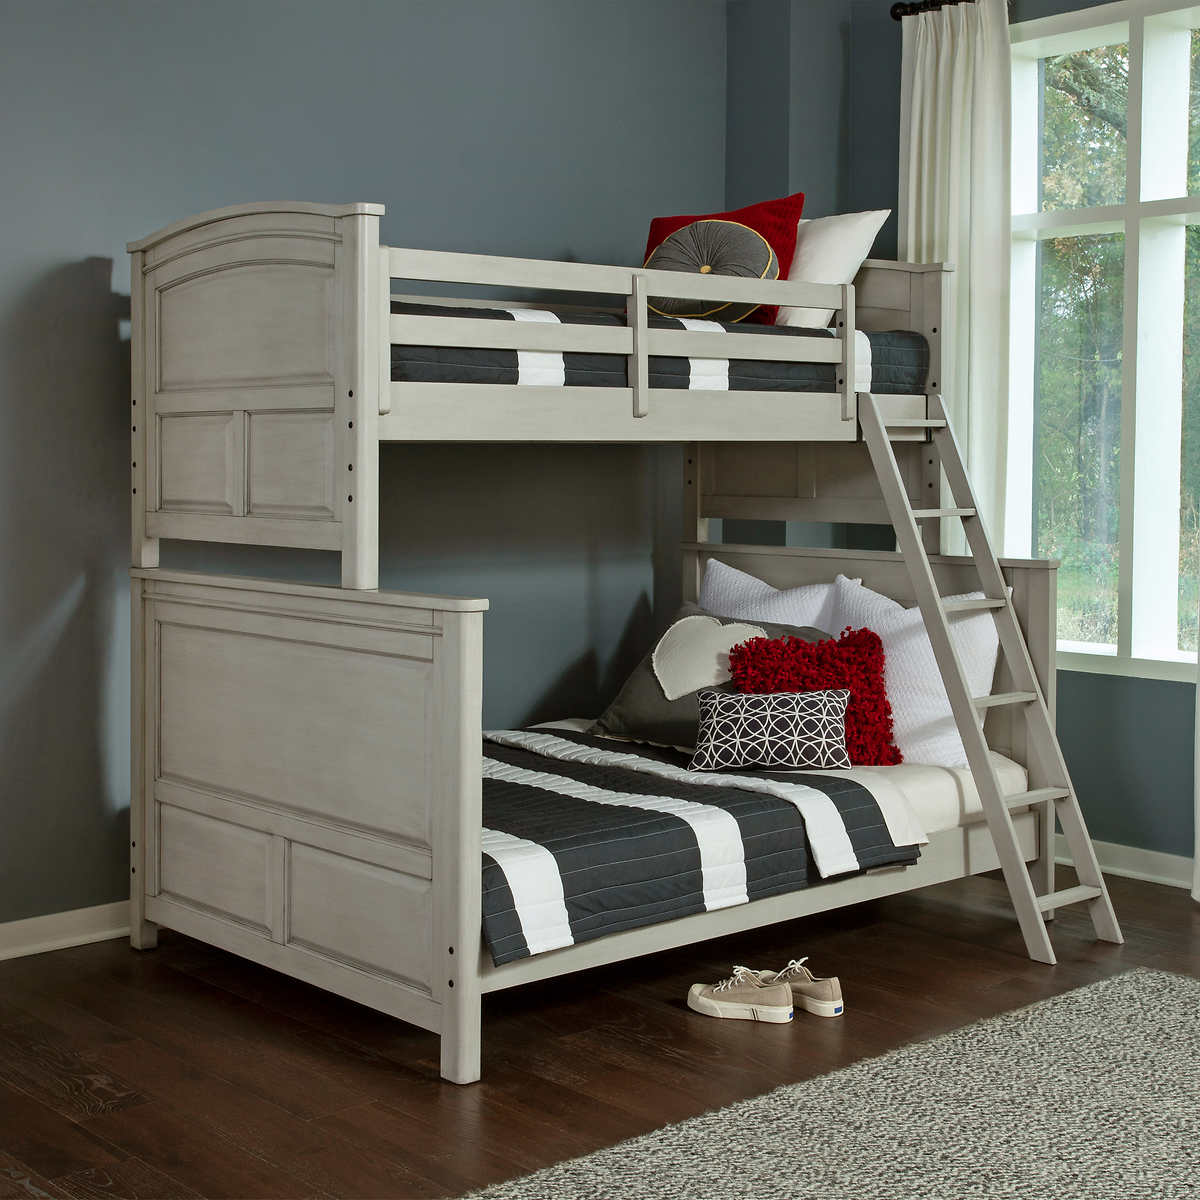 Wingate Twin Over Full Bunk Bed Costco, Cargo Furniture Bunk Beds